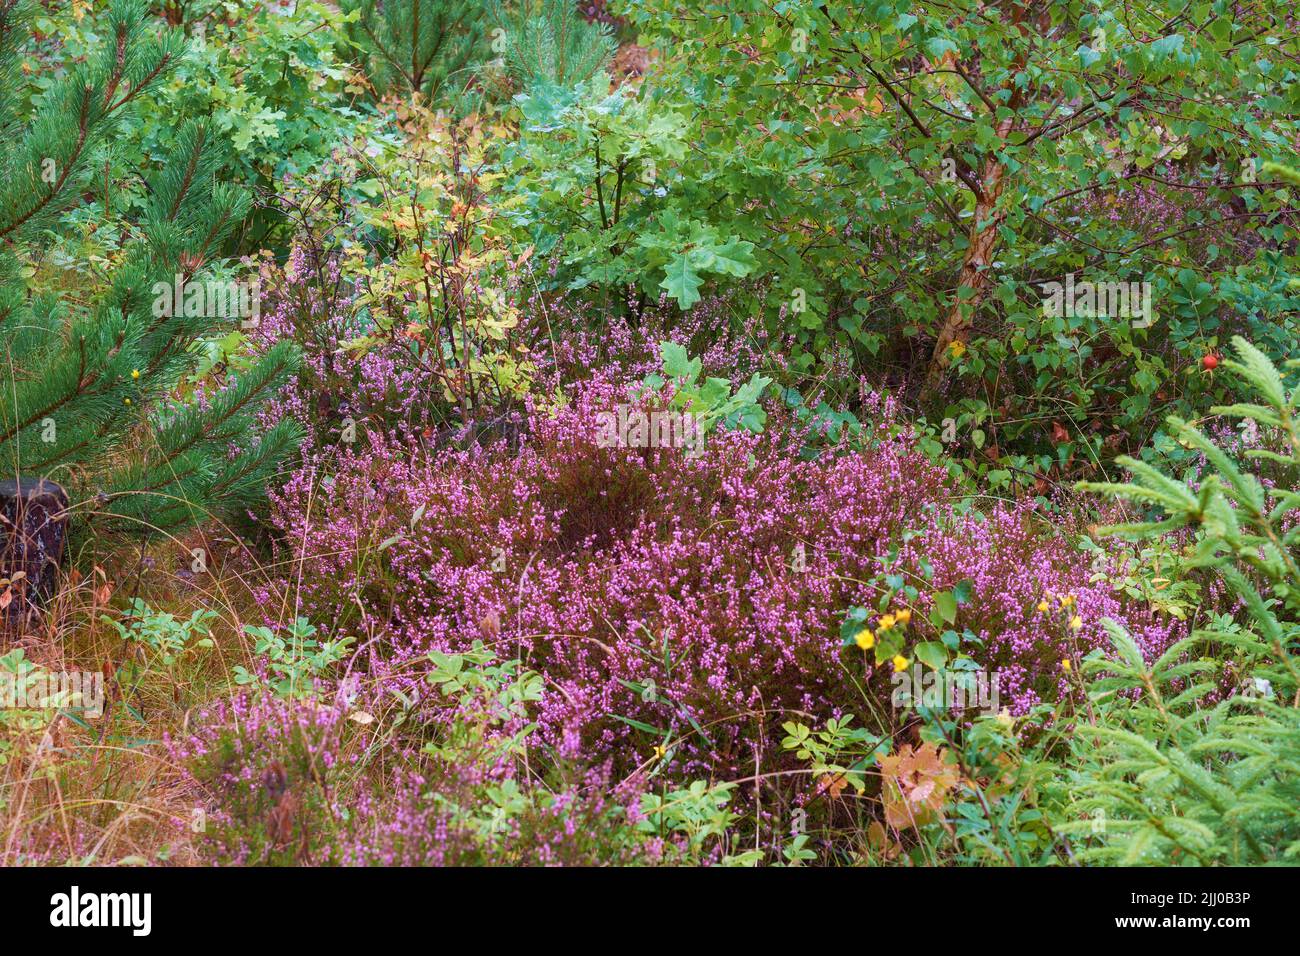 Scotch heather flowers growing in a forest with pine trees and other plant species. Lush green field with various flowering bushes in a garden Stock Photo